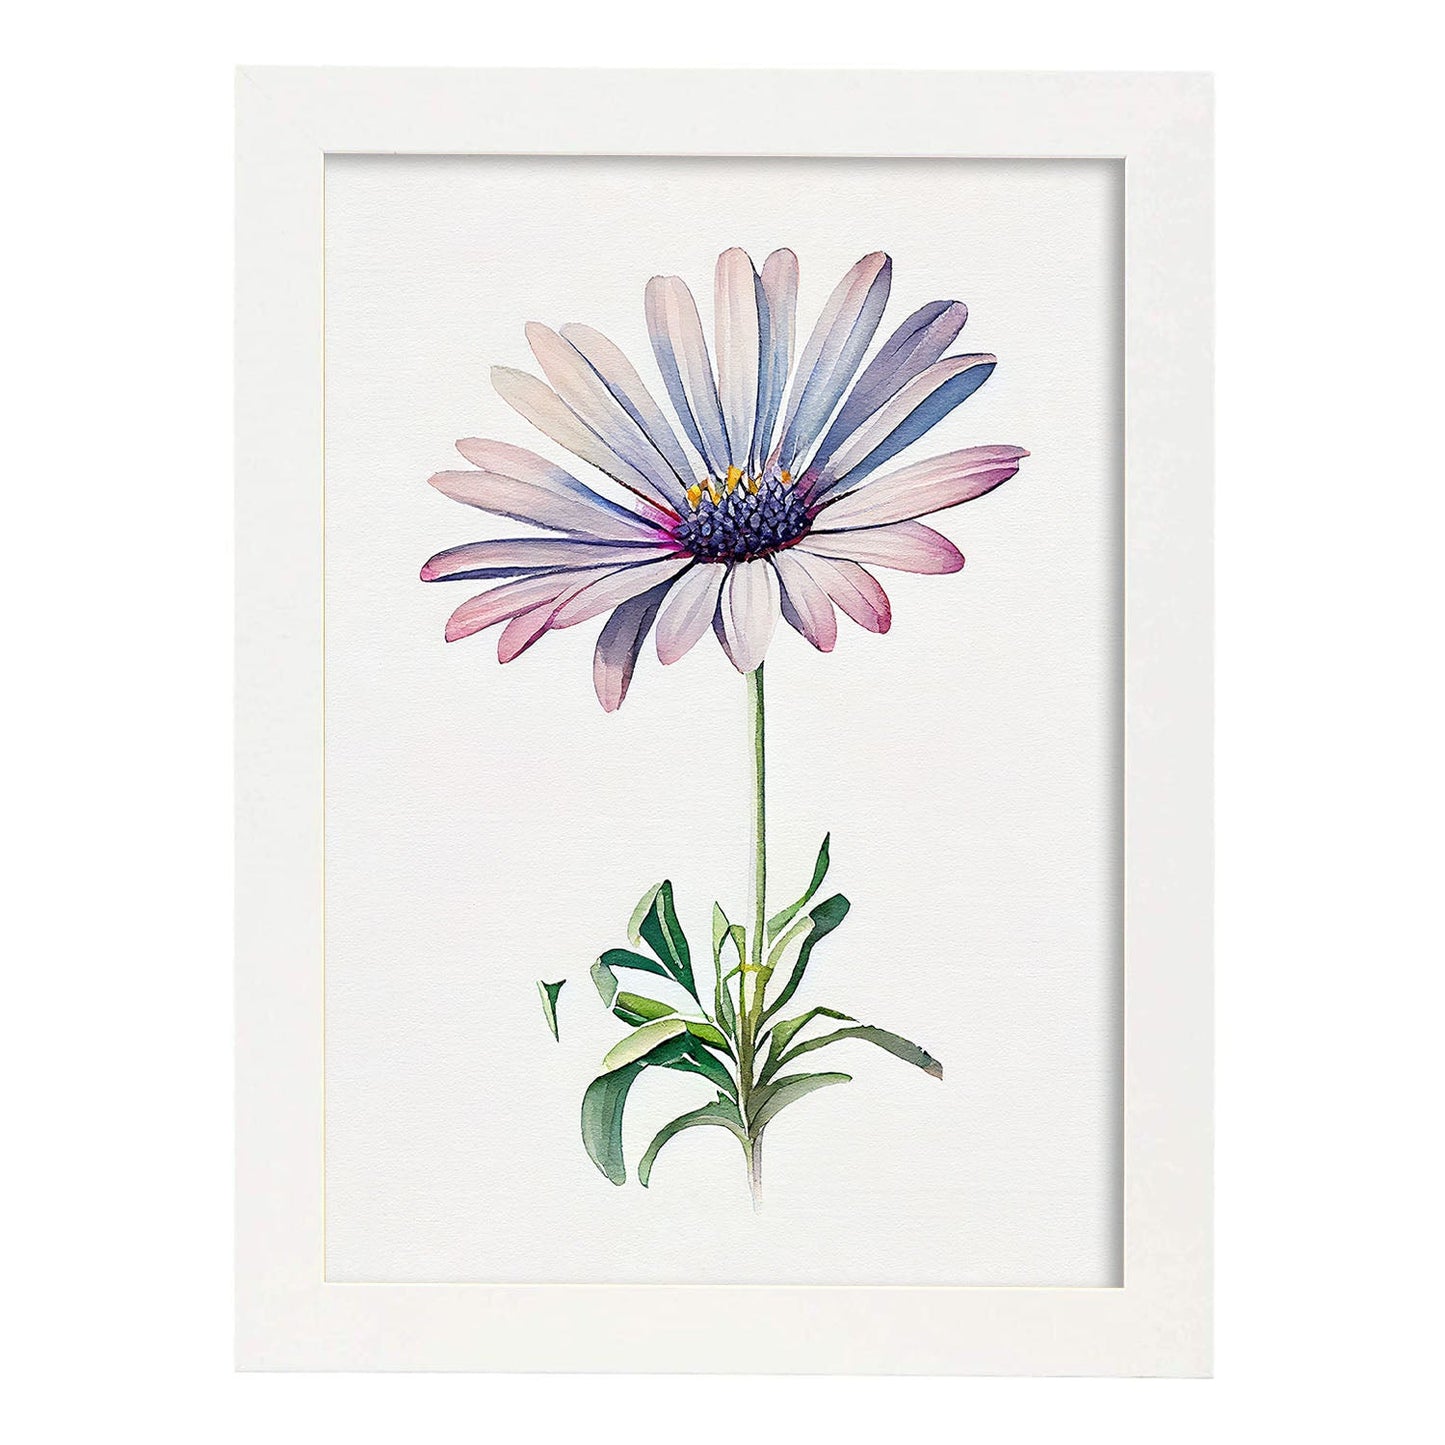 Nacnic watercolor minmal African Daisy_2. Aesthetic Wall Art Prints for Bedroom or Living Room Design.